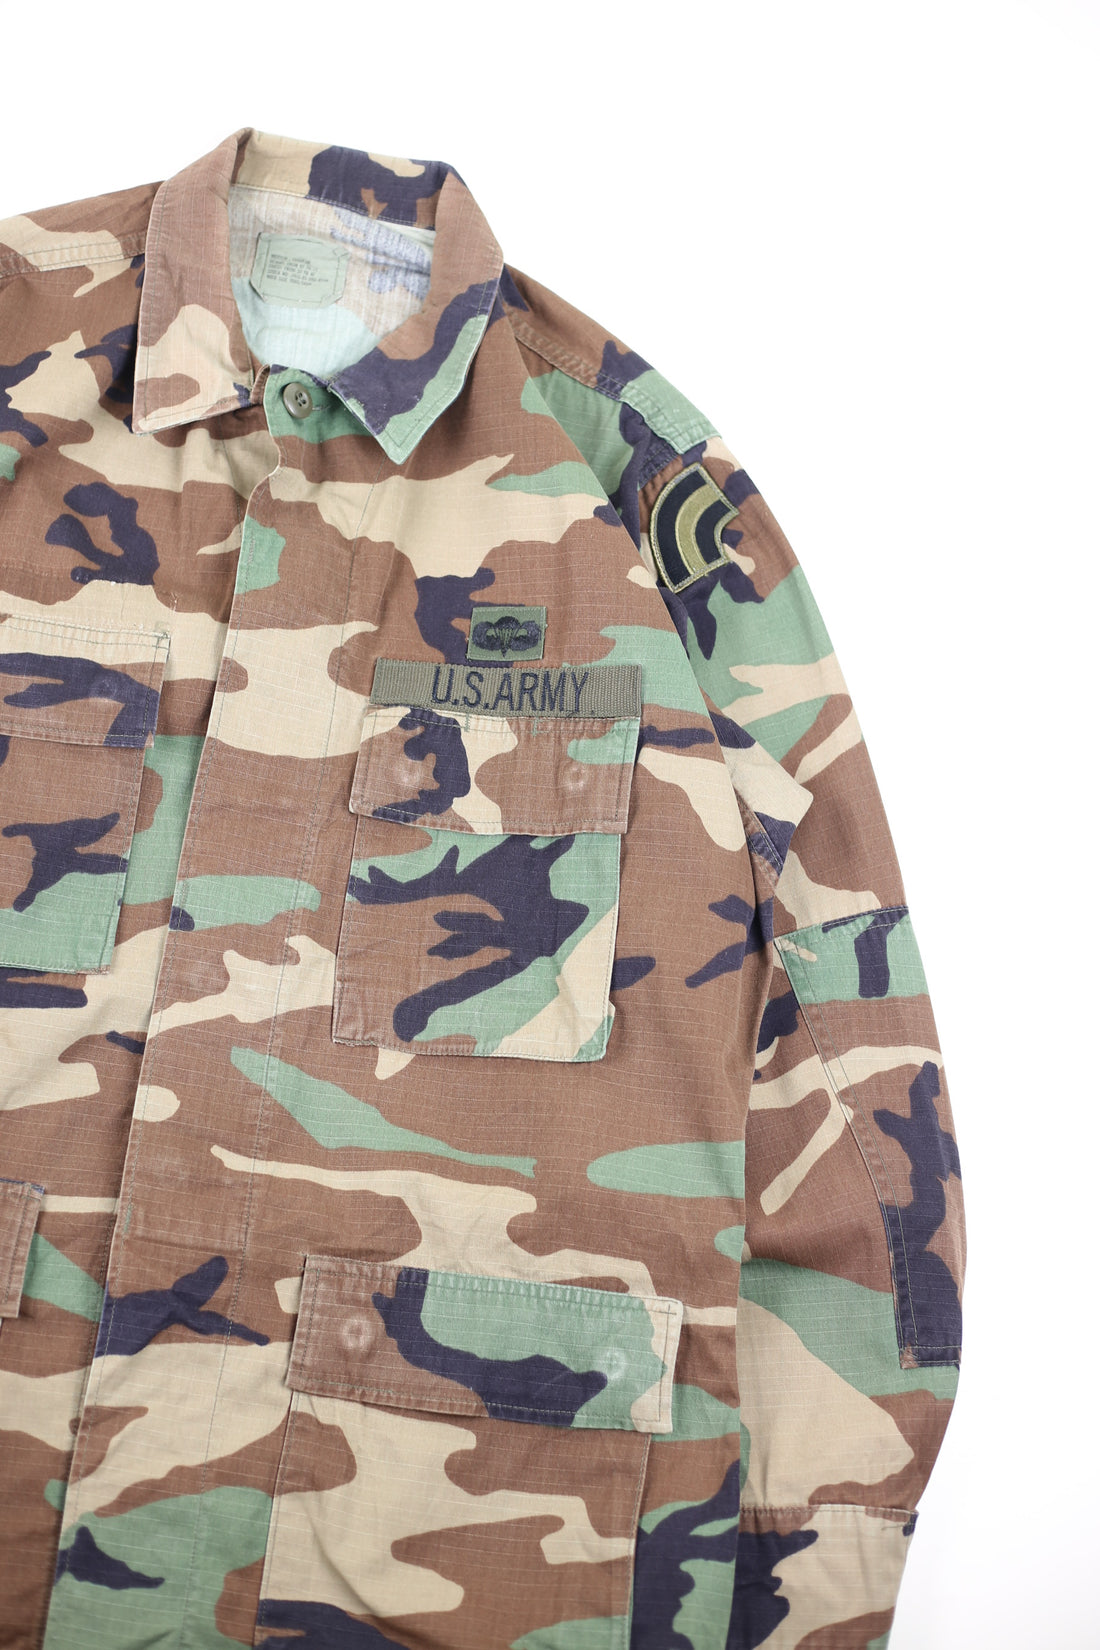 Giacca camouflage BDU WOODLAND  Us Army Airborne - L -